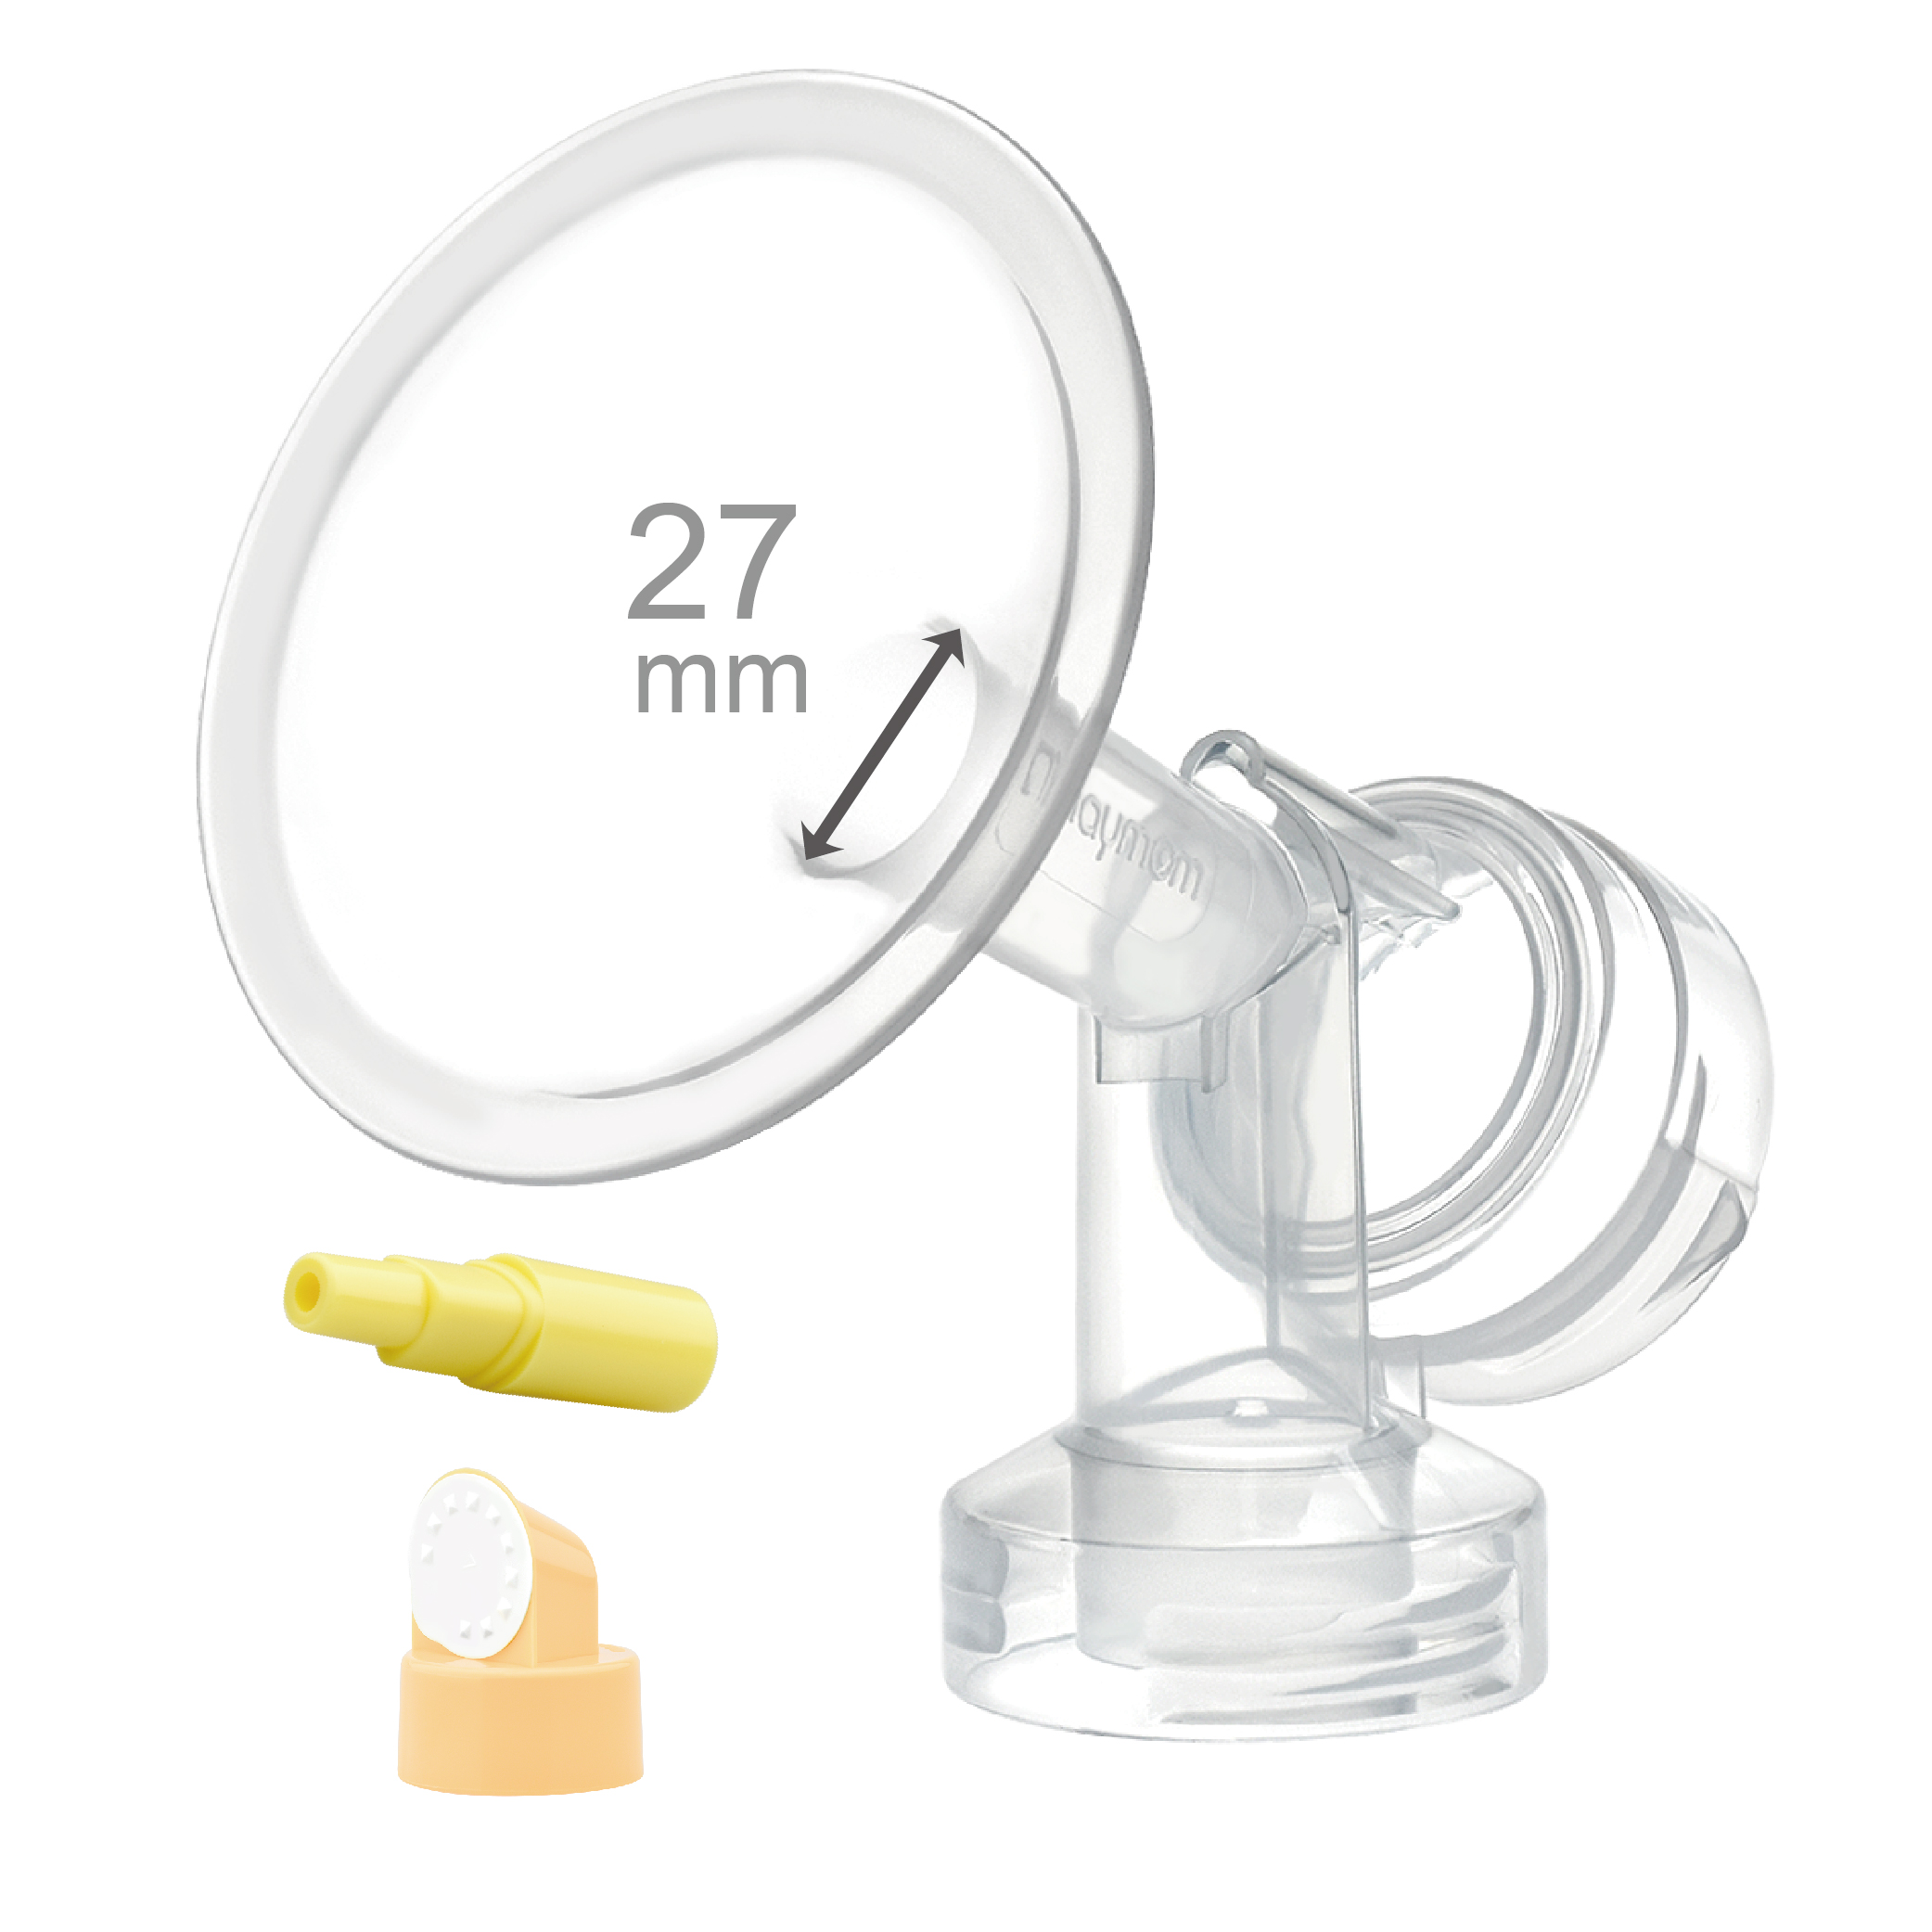 (image for) 27 mm Extra Small Flange w/ Valve and Membrane for SpeCtra Breast Pumps S1, S2, M1, Spectra 9; Narrow (Standard) Bottle Neck; 1 pc